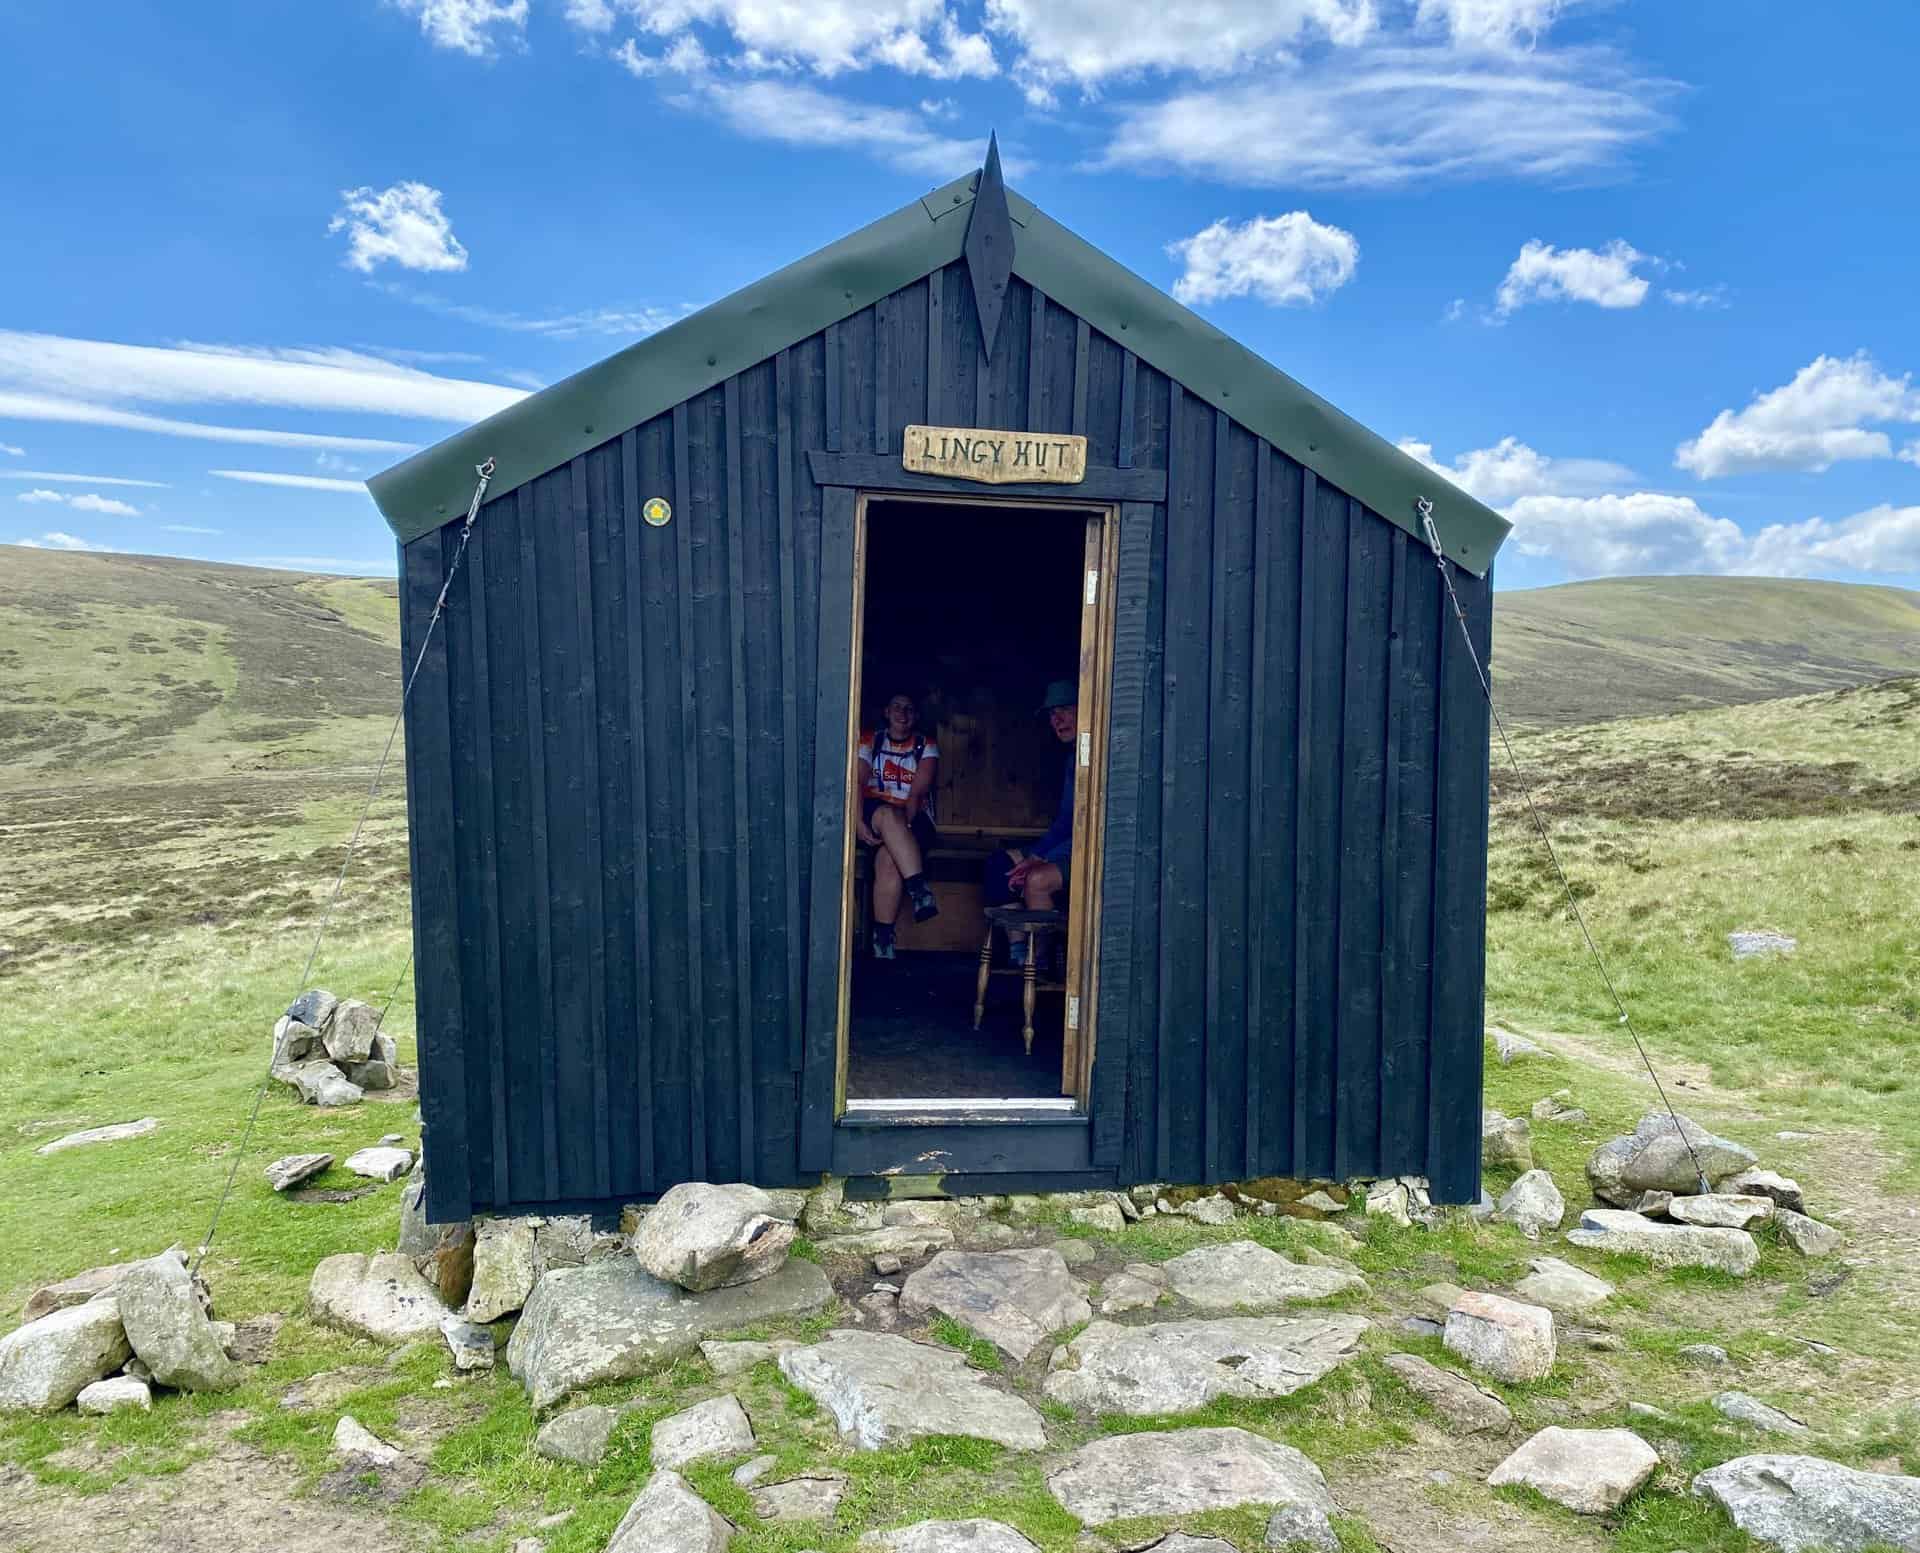 Lingy Hut, a bothy on the Cumbria Way between Coomb Height and High Pike. The last time I was here the area was covered in deep snow and the bothy provided a very welcome shelter and resting place. The bothy marks the halfway point of this Carrock Fell walk.